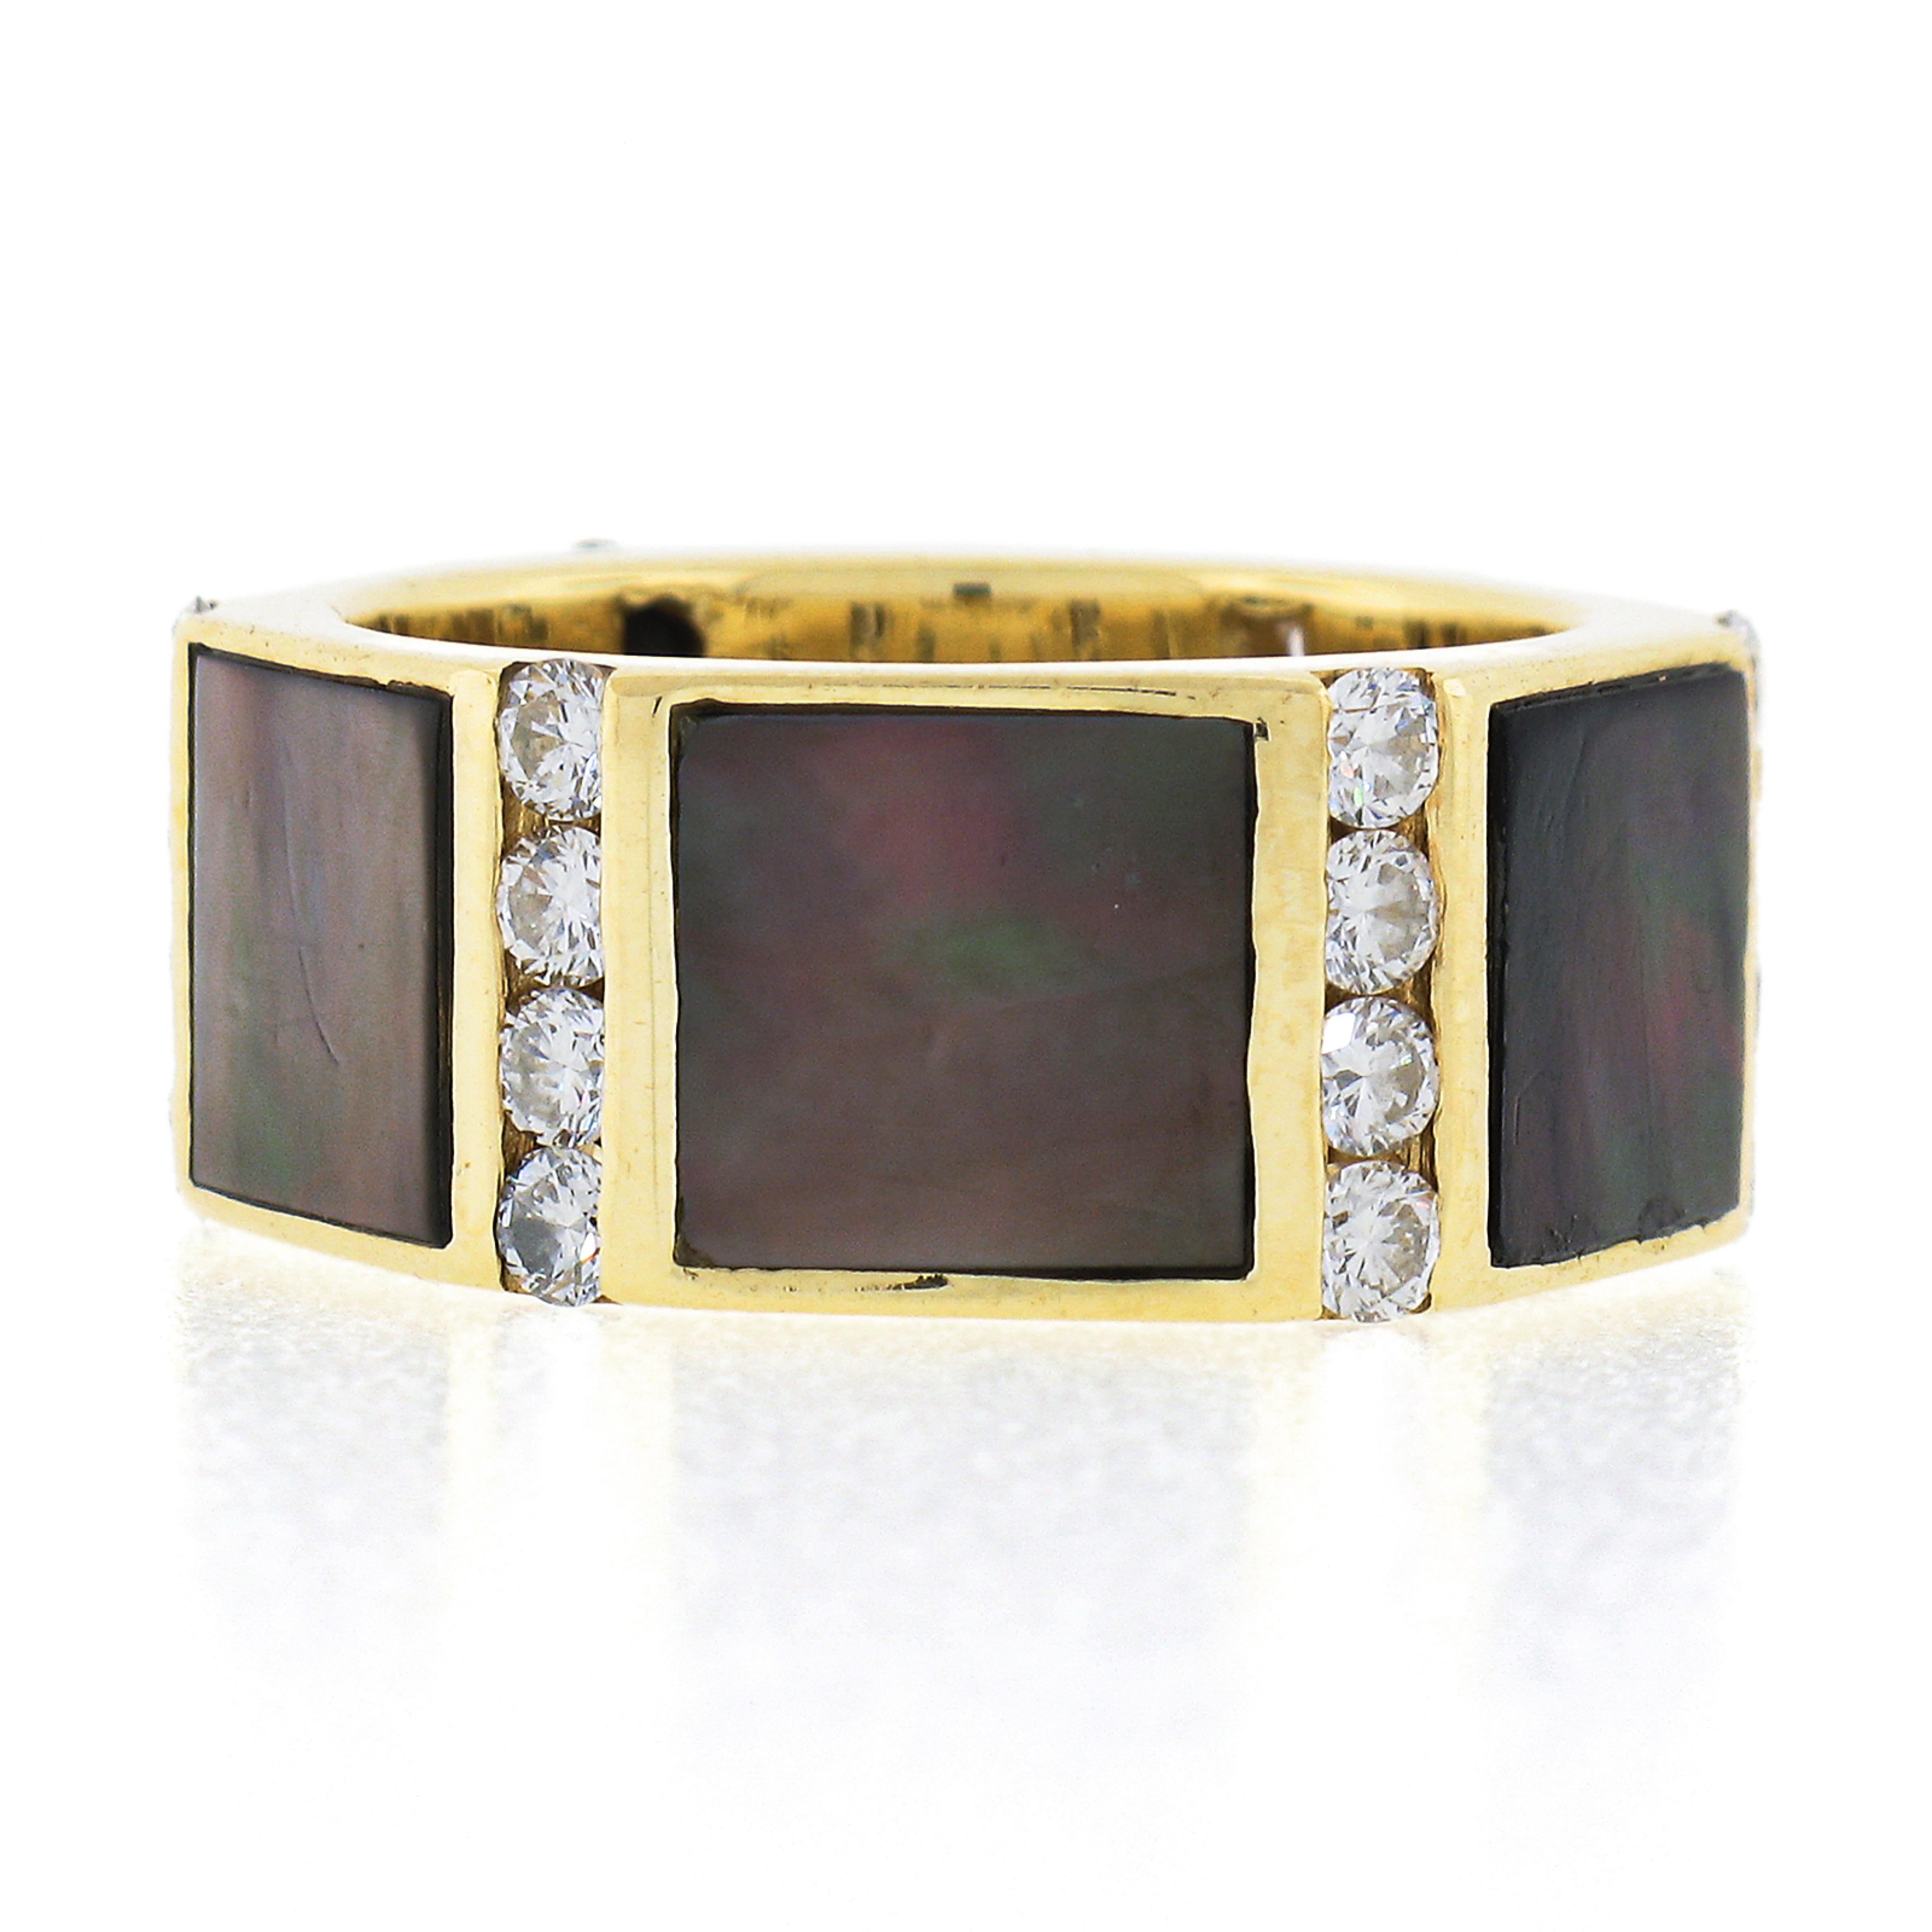 Vintage Gemlok 18K Gold Diamond Inlaid Black Mother of Pearl Eternity Band Ring For Sale